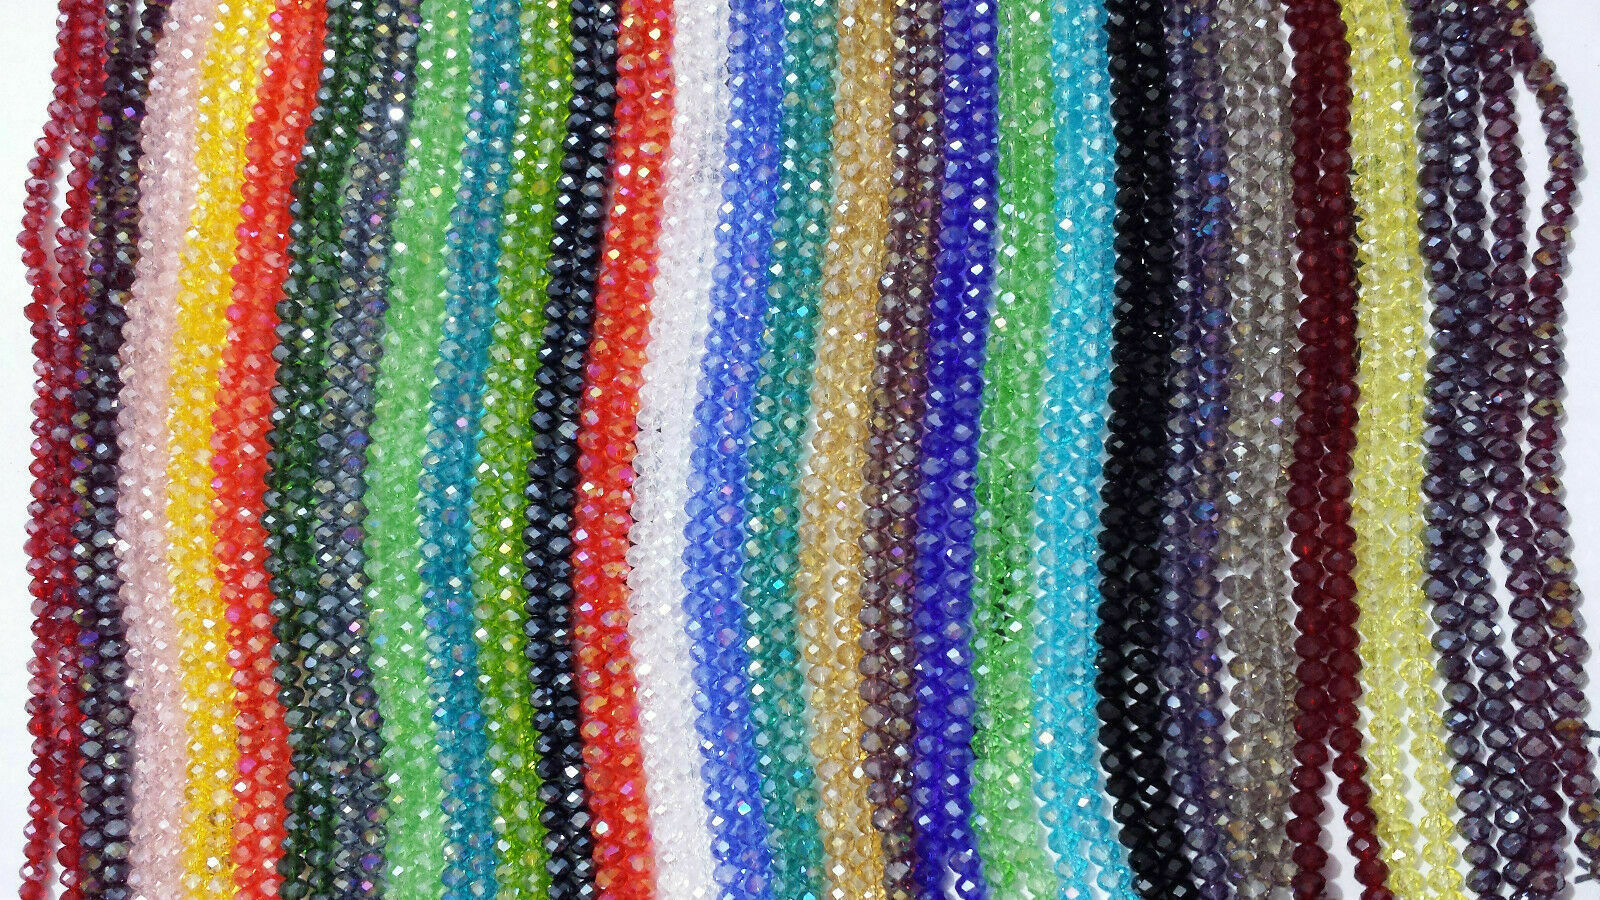 65 Faceted Rondelle Crystal Glass Beads Loose Beads 6x8mm Jewelery Making